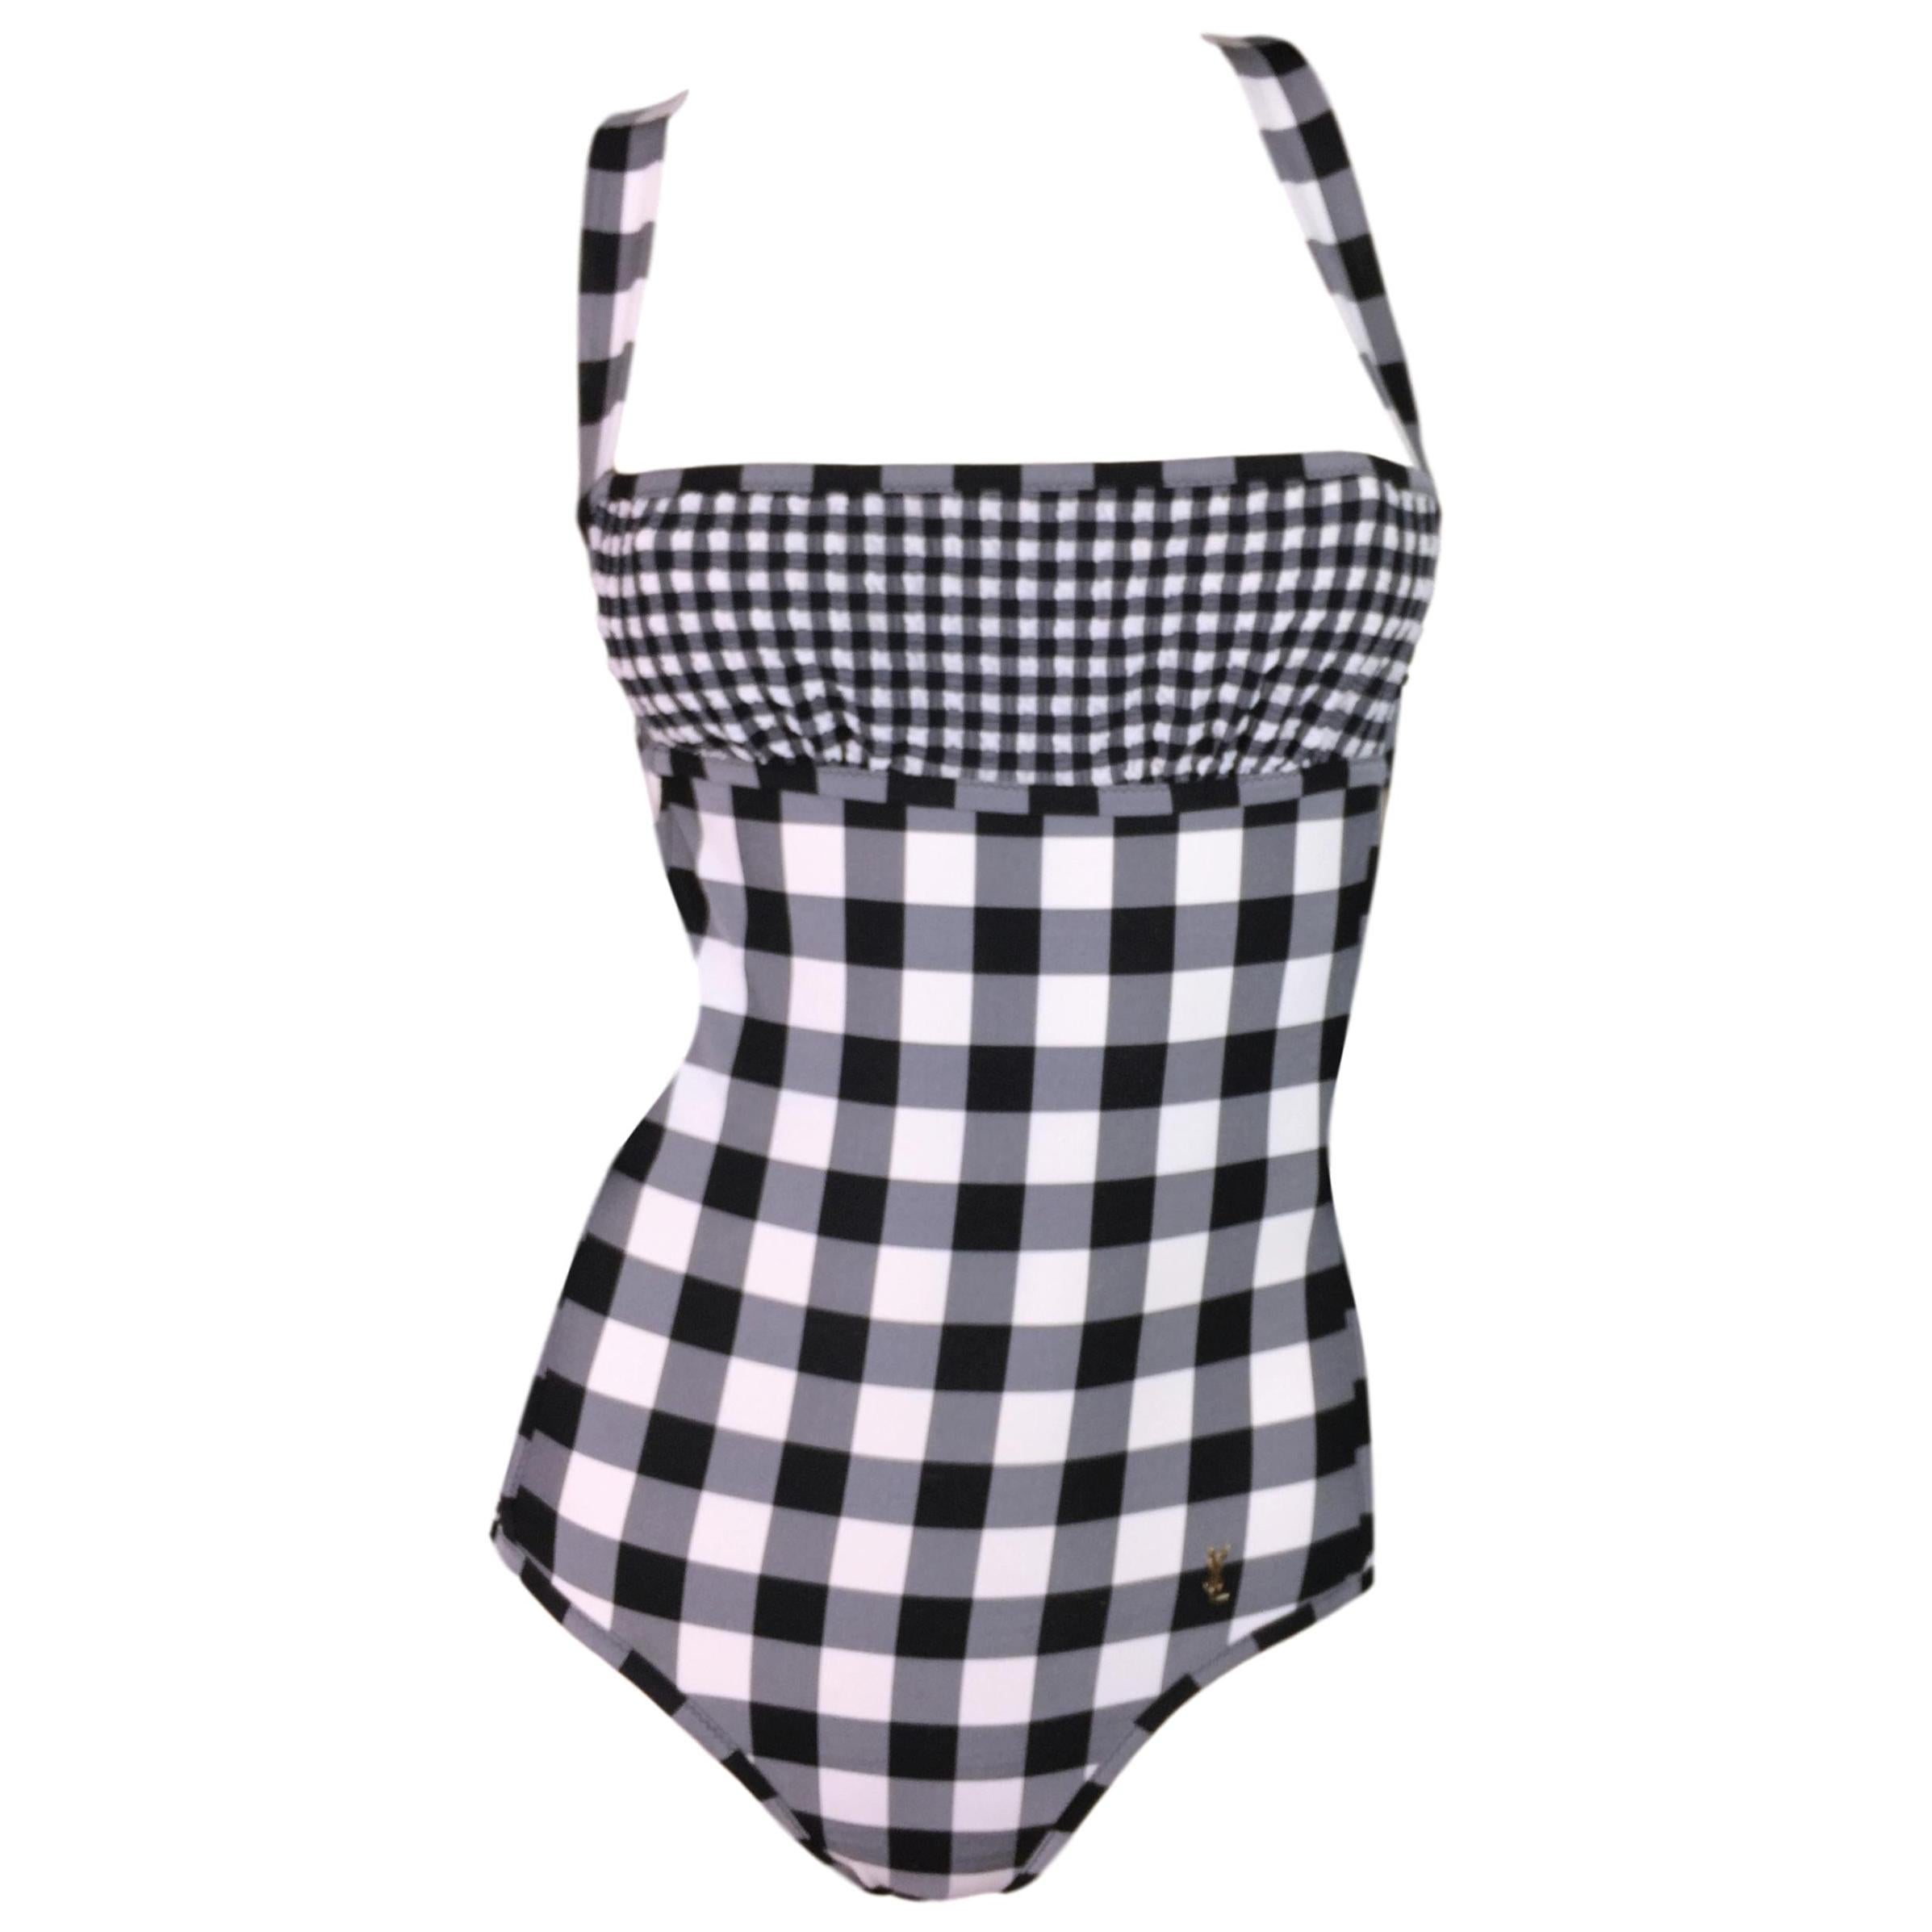 S/S 2007 Yves Saint Laurent Pin-Up Gingham Black & White Cut-Out Swimsuit